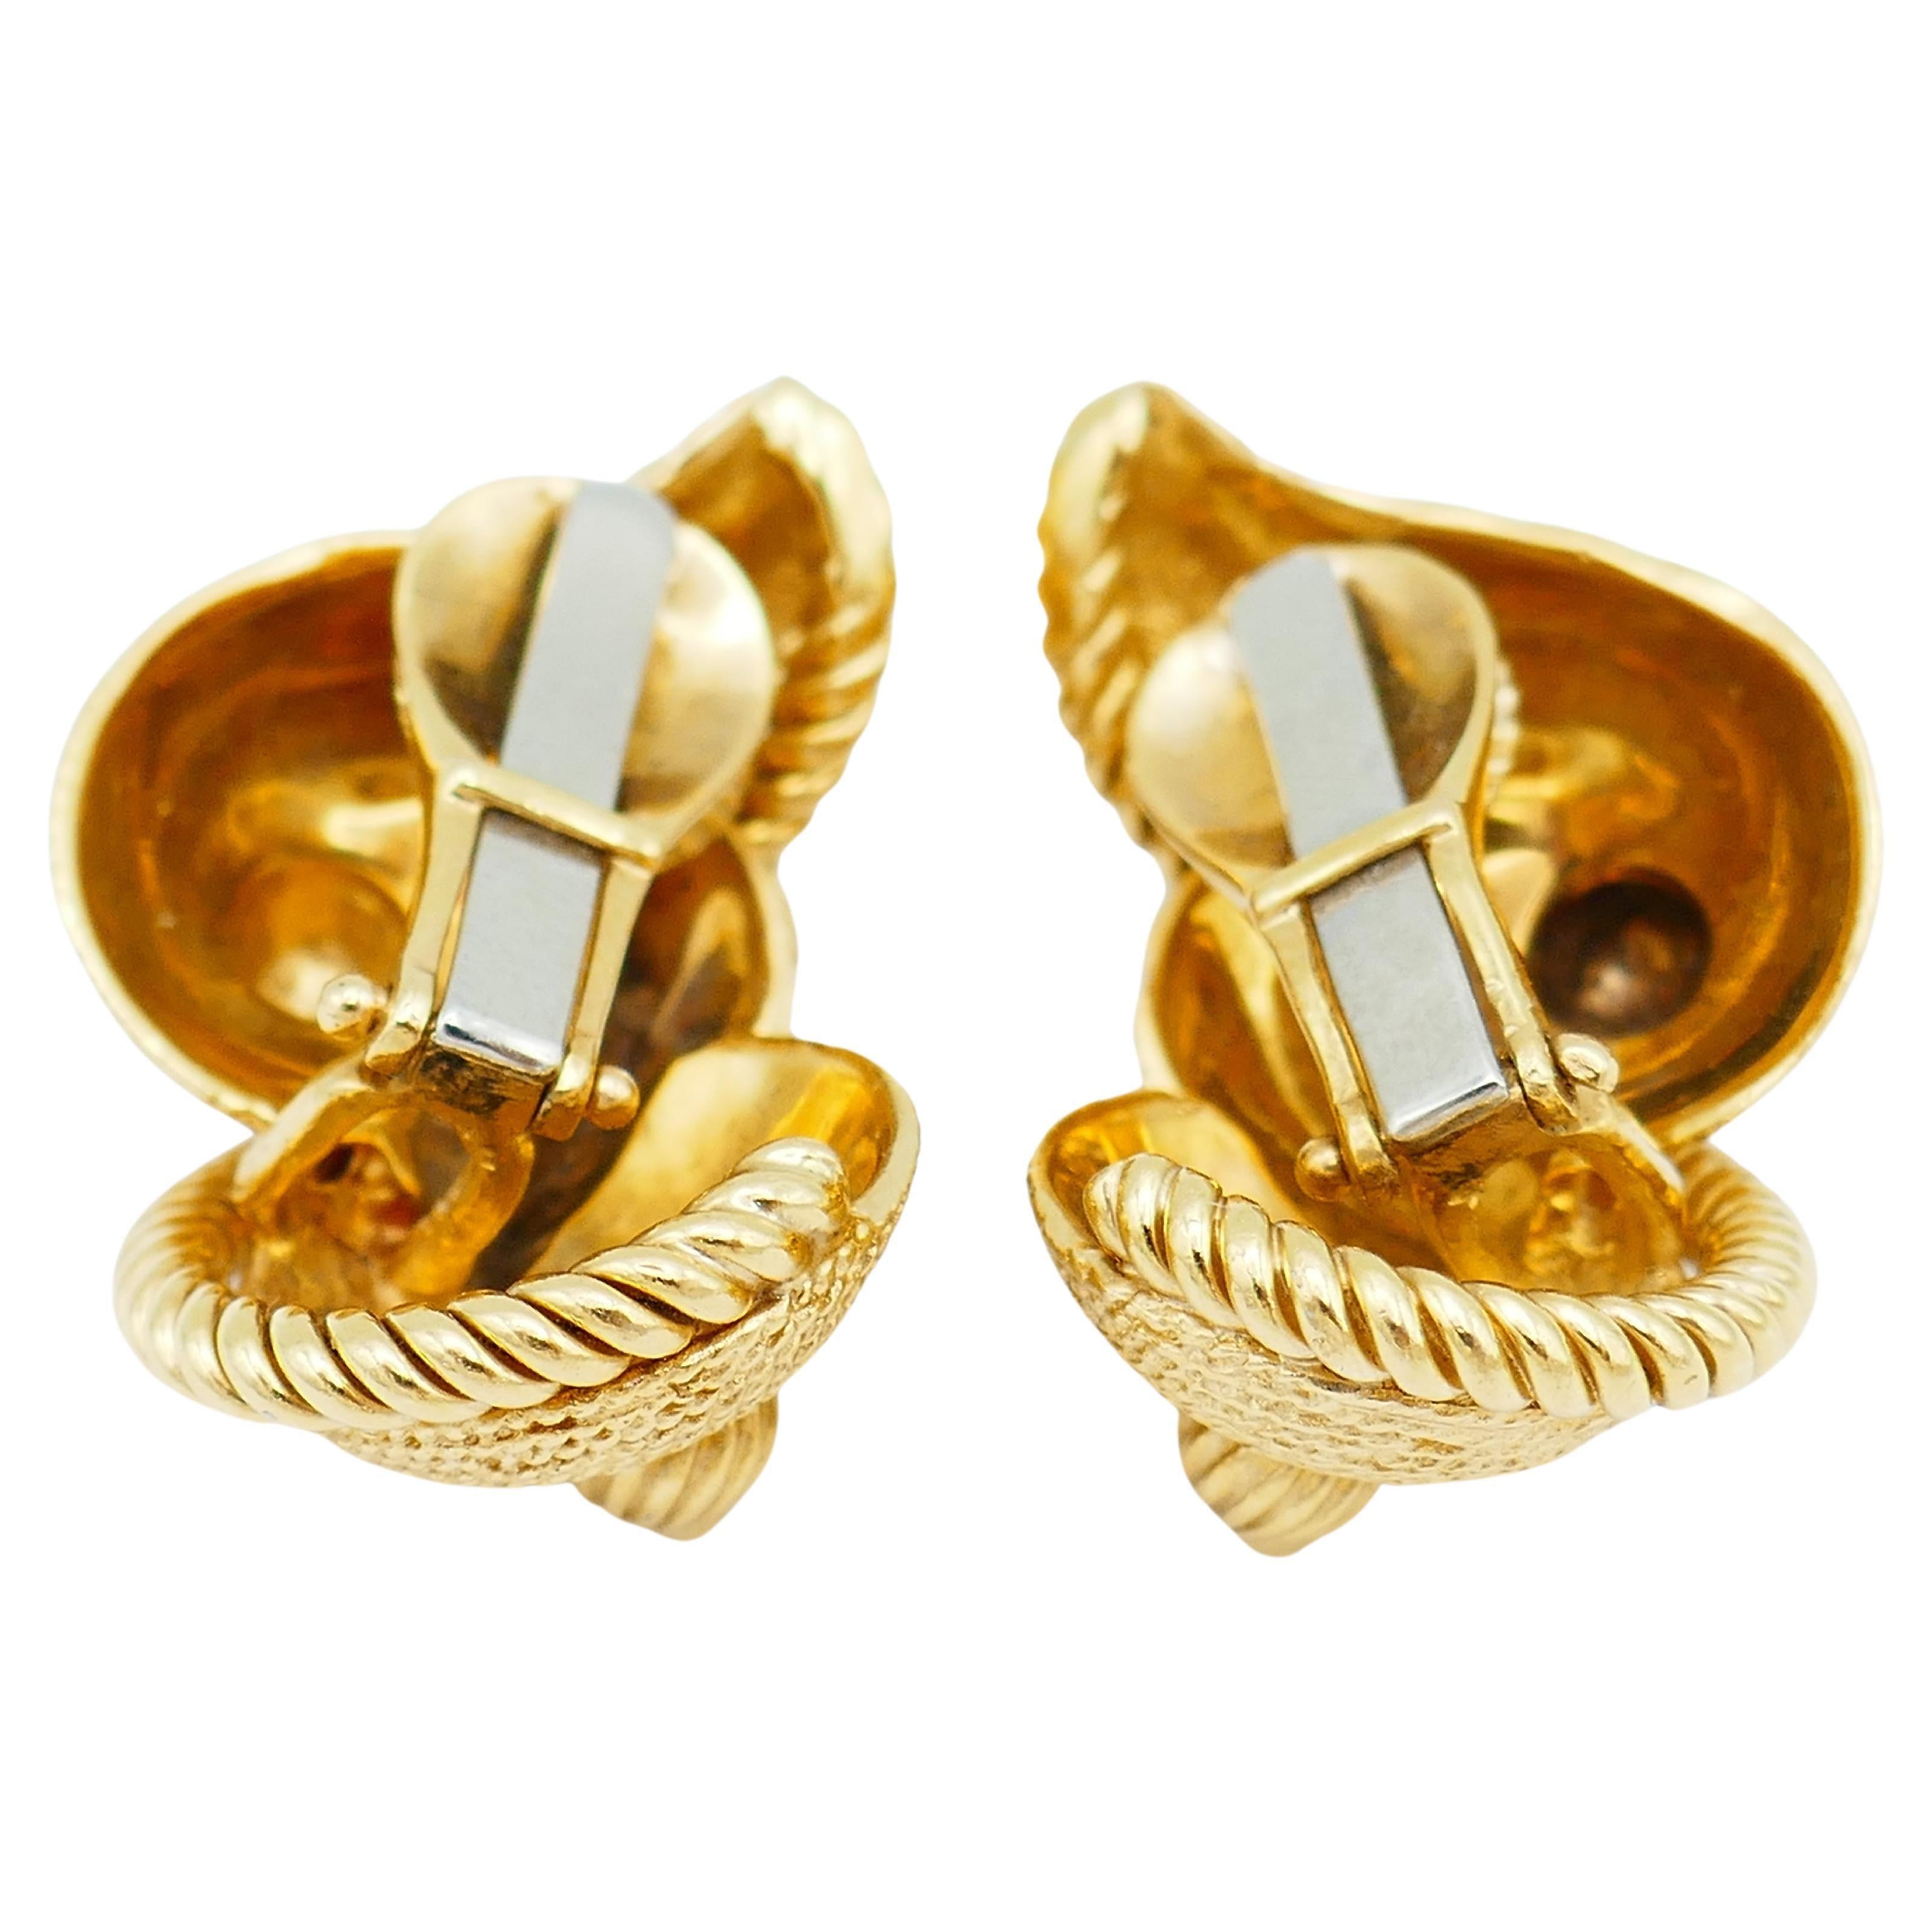 A great pair of David Webb gold earrings designed as sea shells.
Features amazing textured details making the earrings look very close to the natural shells. 
The earrings comprise of two swirl gold 